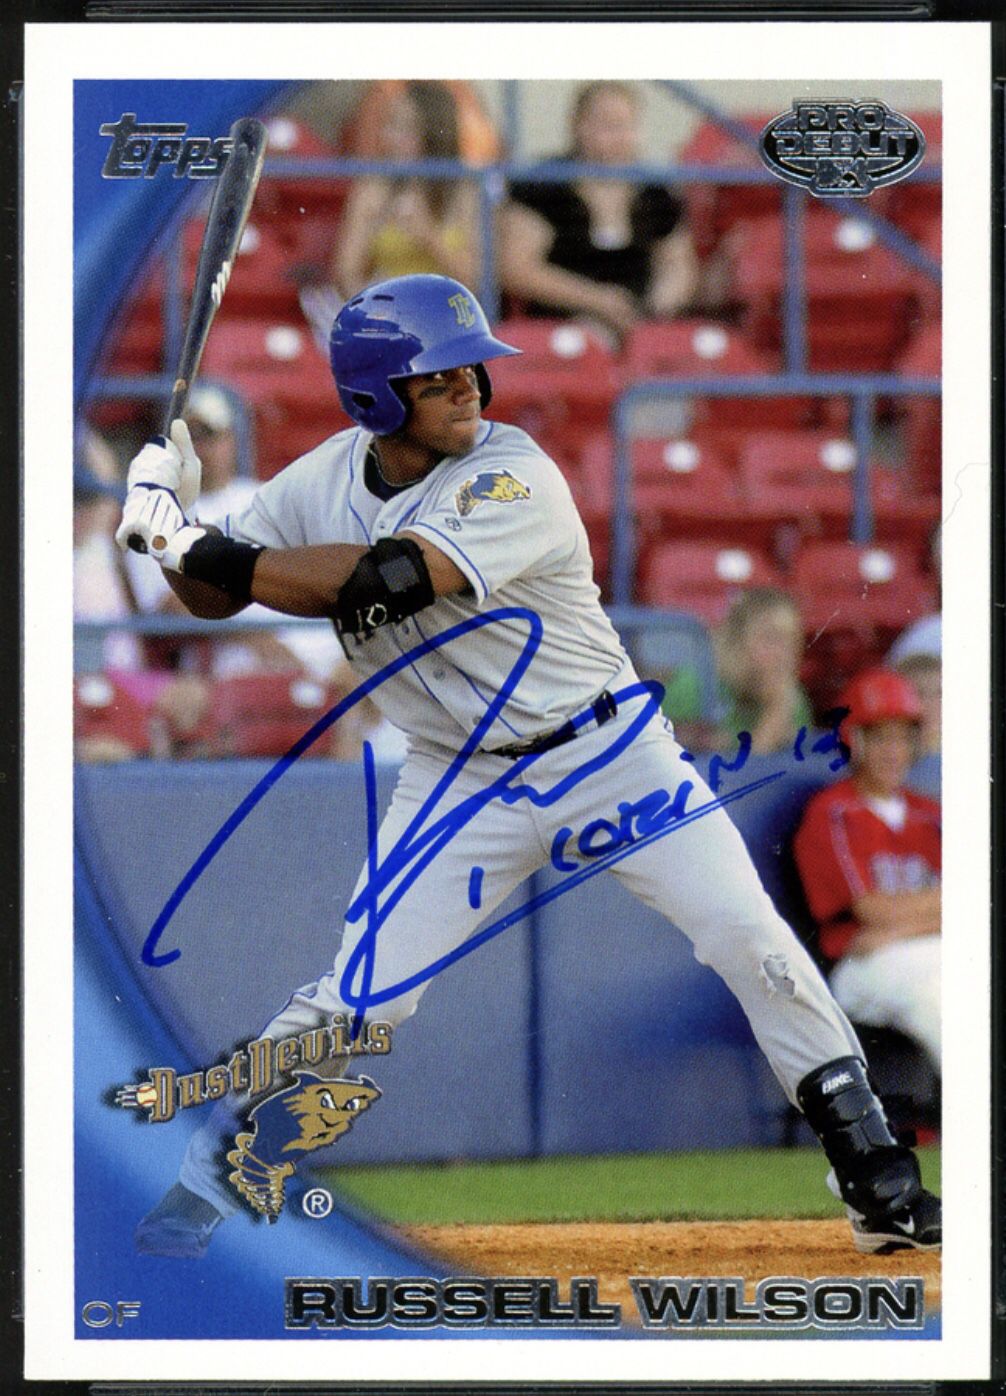 Russell Wilson 2010 autographed baseball card